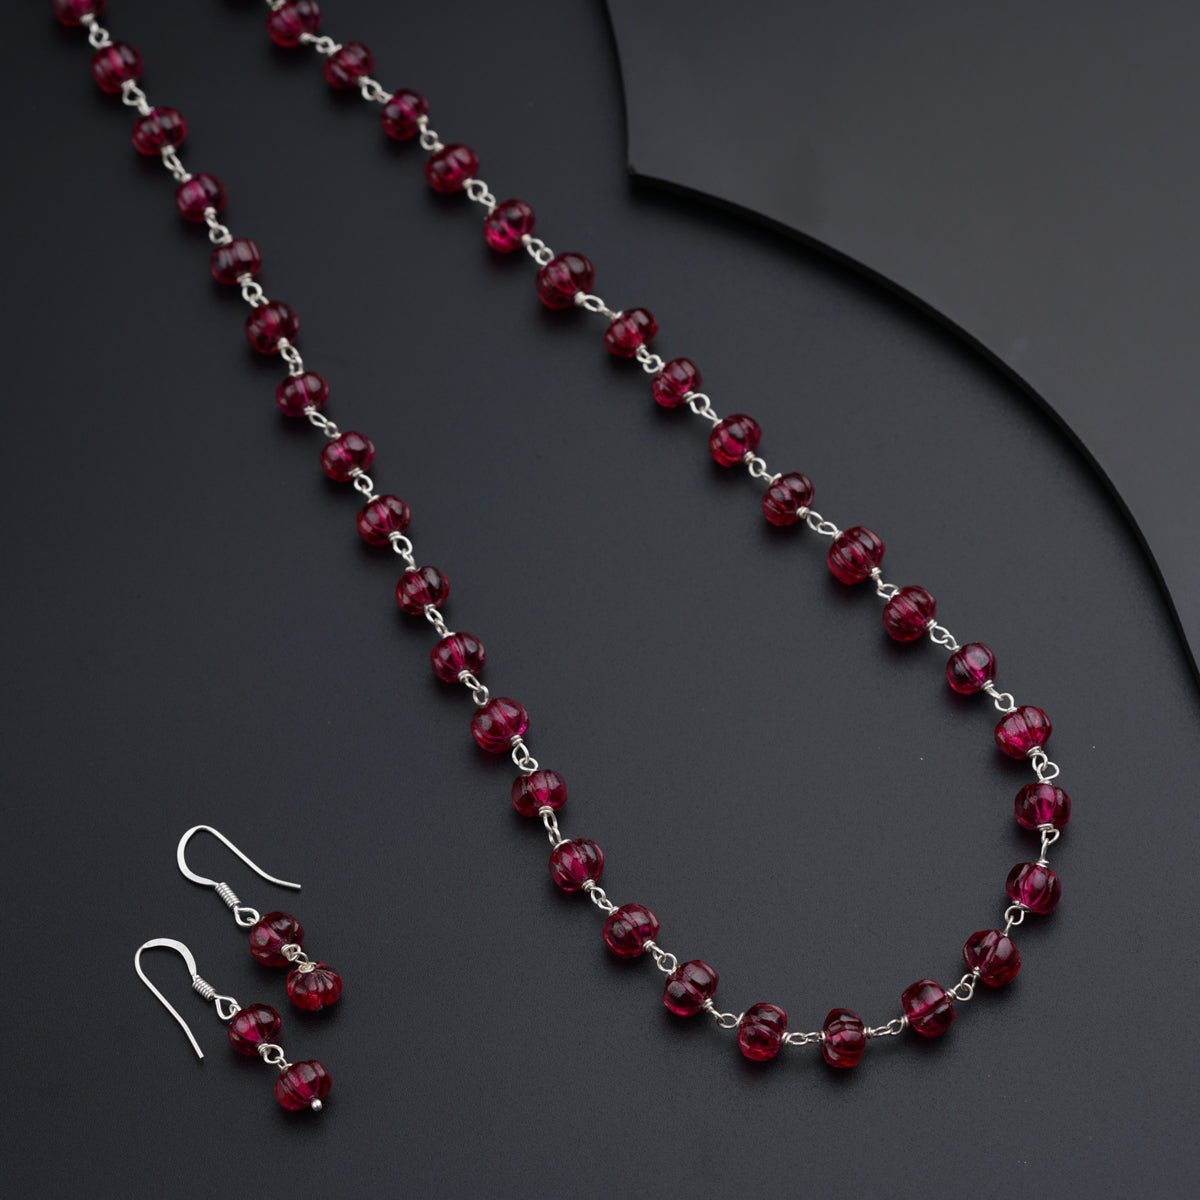 a red beaded necklace and earrings on a black surface